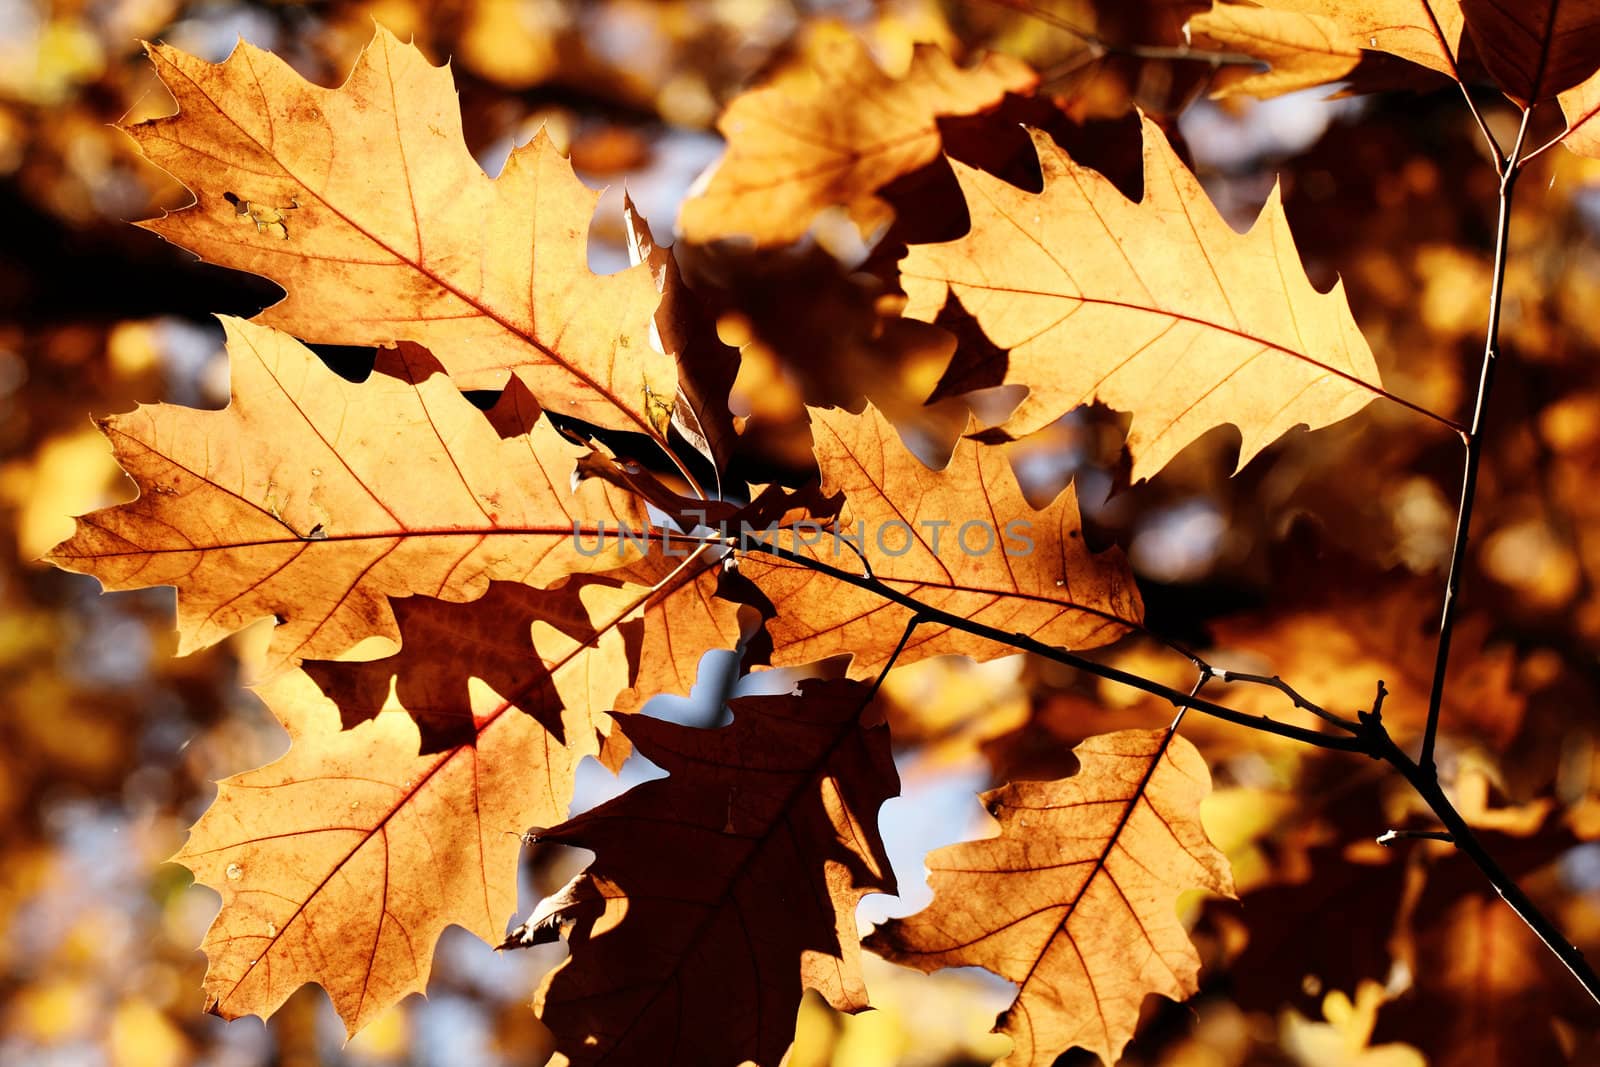 Colorful autumn leaves by Nneirda